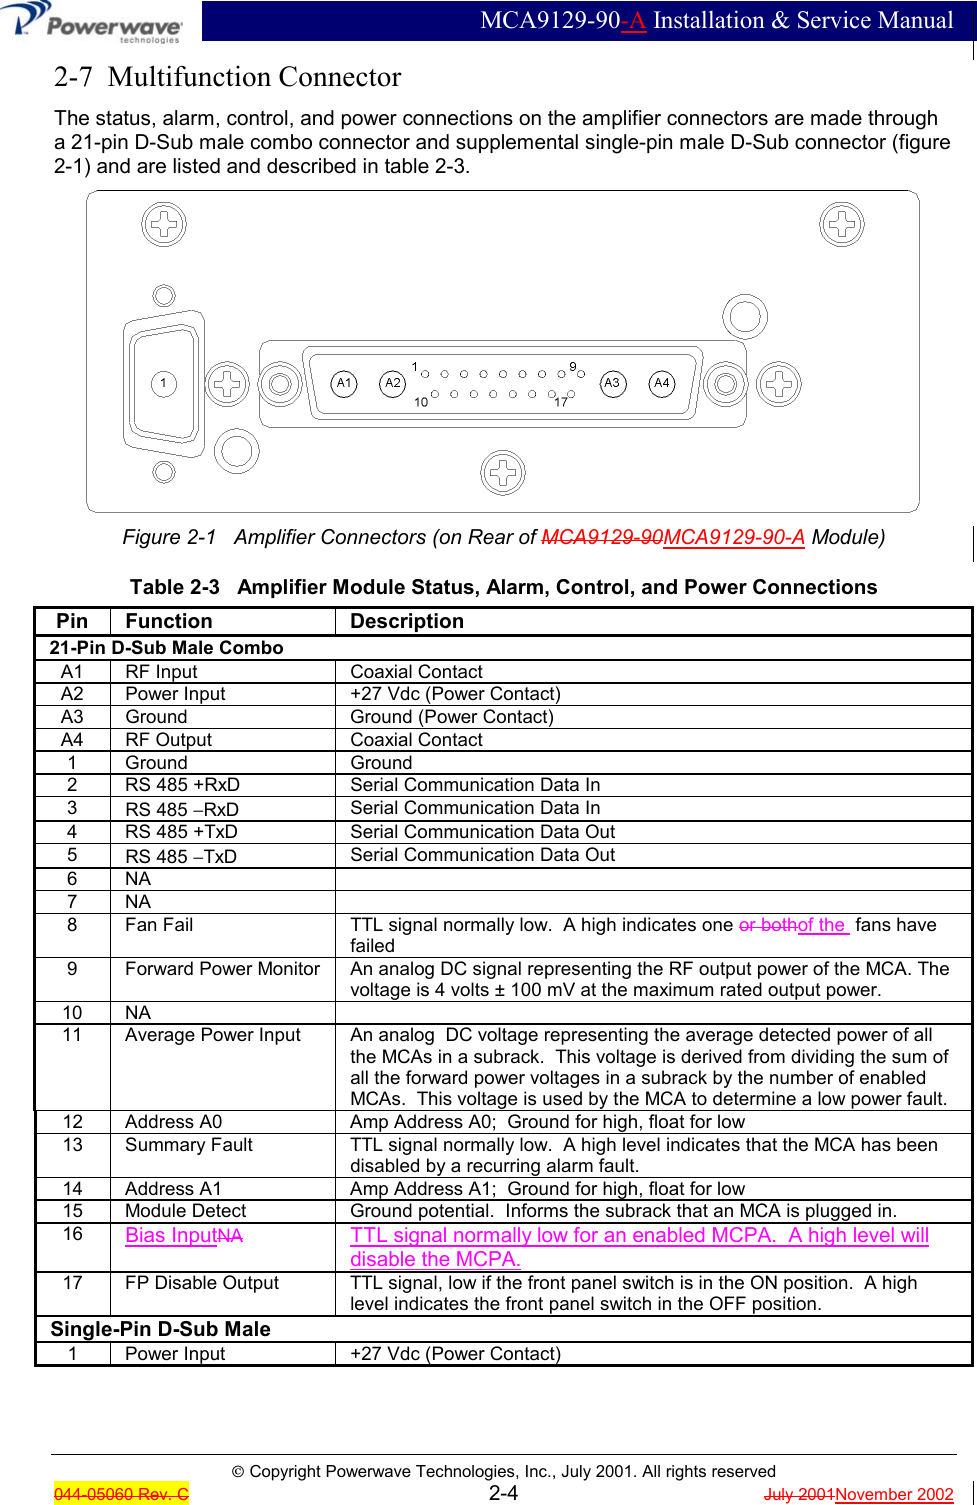  MCA9129-90-A Installation &amp; Service ManualÓ Copyright Powerwave Technologies, Inc., July 2001. All rights reserved044-05060 Rev. C 2-4 July 2001November 20022-7  Multifunction ConnectorThe status, alarm, control, and power connections on the amplifier connectors are made througha 21-pin D-Sub male combo connector and supplemental single-pin male D-Sub connector (figure2-1) and are listed and described in table 2-3.Figure 2-1   Amplifier Connectors (on Rear of MCA9129-90MCA9129-90-A Module)Table 2-3   Amplifier Module Status, Alarm, Control, and Power ConnectionsPin Function Description21-Pin D-Sub Male ComboA1 RF Input Coaxial ContactA2 Power Input +27 Vdc (Power Contact)A3 Ground Ground (Power Contact)A4 RF Output Coaxial Contact1 Ground Ground2 RS 485 +RxD Serial Communication Data In3RS 485 -RxD Serial Communication Data In4 RS 485 +TxD Serial Communication Data Out5RS 485 -TxD Serial Communication Data Out6NA7NA8 Fan Fail TTL signal normally low.  A high indicates one or bothof the  fans havefailed9 Forward Power Monitor An analog DC signal representing the RF output power of the MCA. Thevoltage is 4 volts ± 100 mV at the maximum rated output power.10 NA11 Average Power Input An analog  DC voltage representing the average detected power of allthe MCAs in a subrack.  This voltage is derived from dividing the sum ofall the forward power voltages in a subrack by the number of enabledMCAs.  This voltage is used by the MCA to determine a low power fault.12 Address A0 Amp Address A0;  Ground for high, float for low13 Summary Fault TTL signal normally low.  A high level indicates that the MCA has beendisabled by a recurring alarm fault.14 Address A1 Amp Address A1;  Ground for high, float for low15 Module Detect Ground potential.  Informs the subrack that an MCA is plugged in.16 Bias InputNA TTL signal normally low for an enabled MCPA.  A high level willdisable the MCPA.17 FP Disable Output TTL signal, low if the front panel switch is in the ON position.  A highlevel indicates the front panel switch in the OFF position.Single-Pin D-Sub Male1 Power Input +27 Vdc (Power Contact)